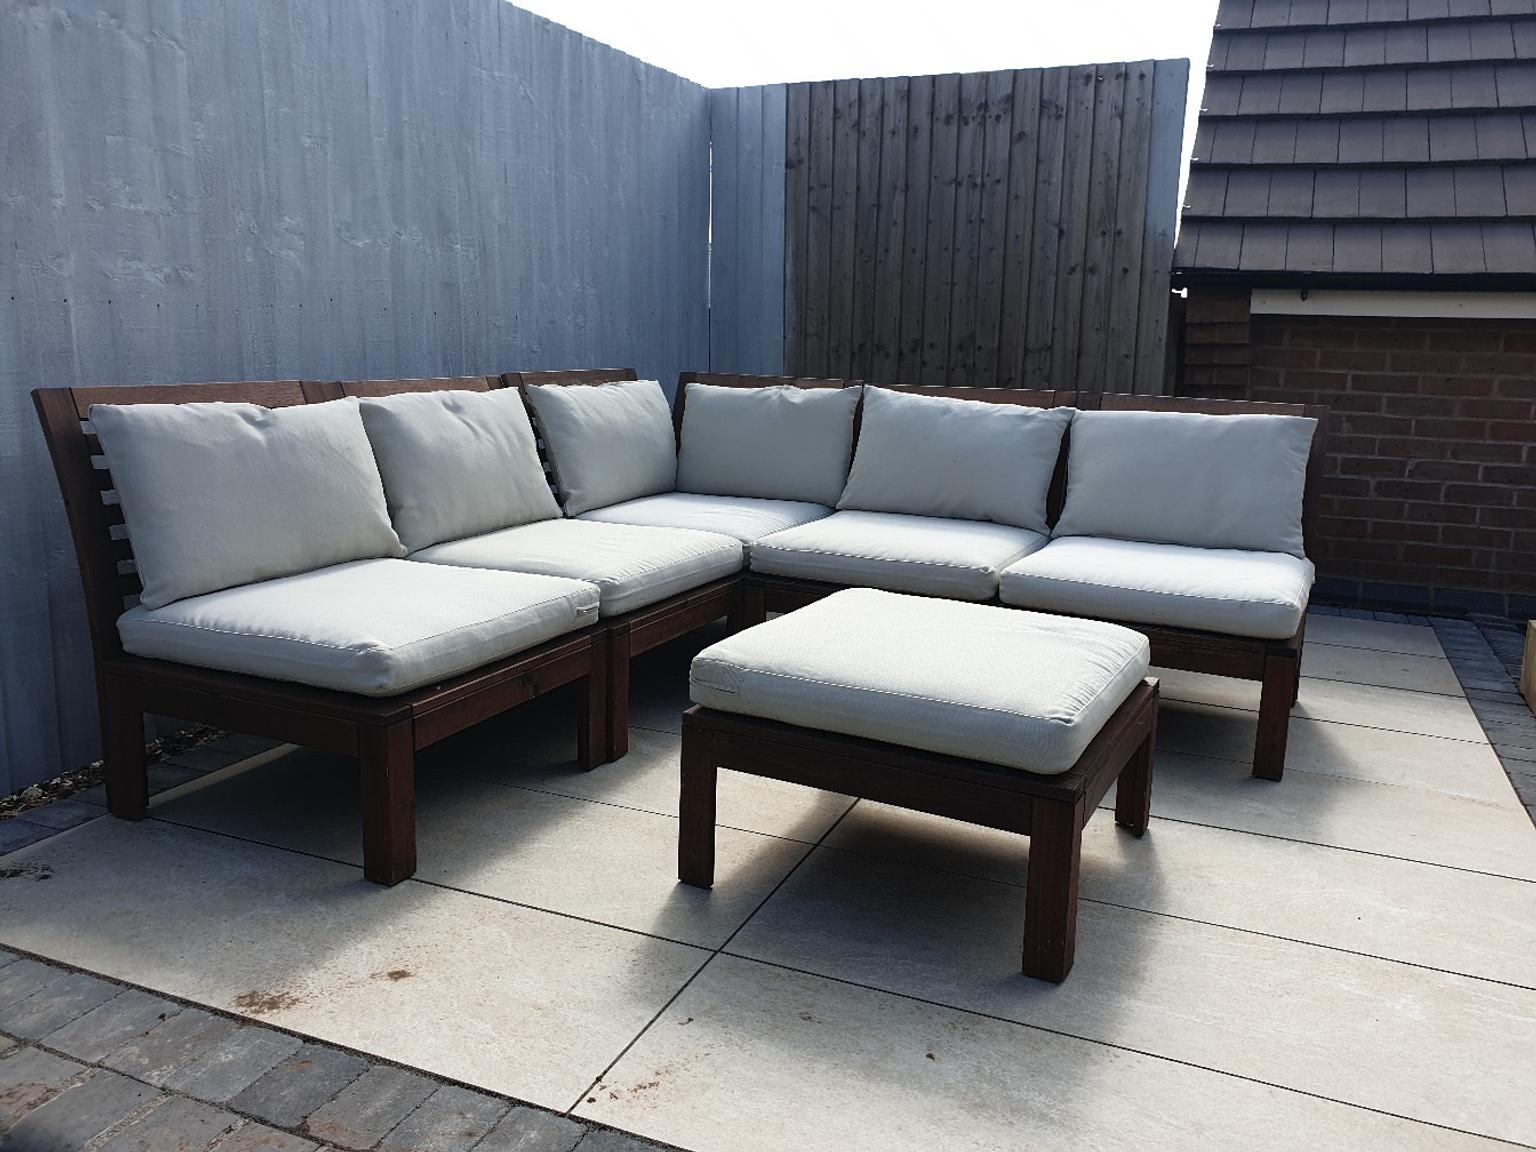 Ikea Applaro Outdoor Modular Seating In North West Leicestershire